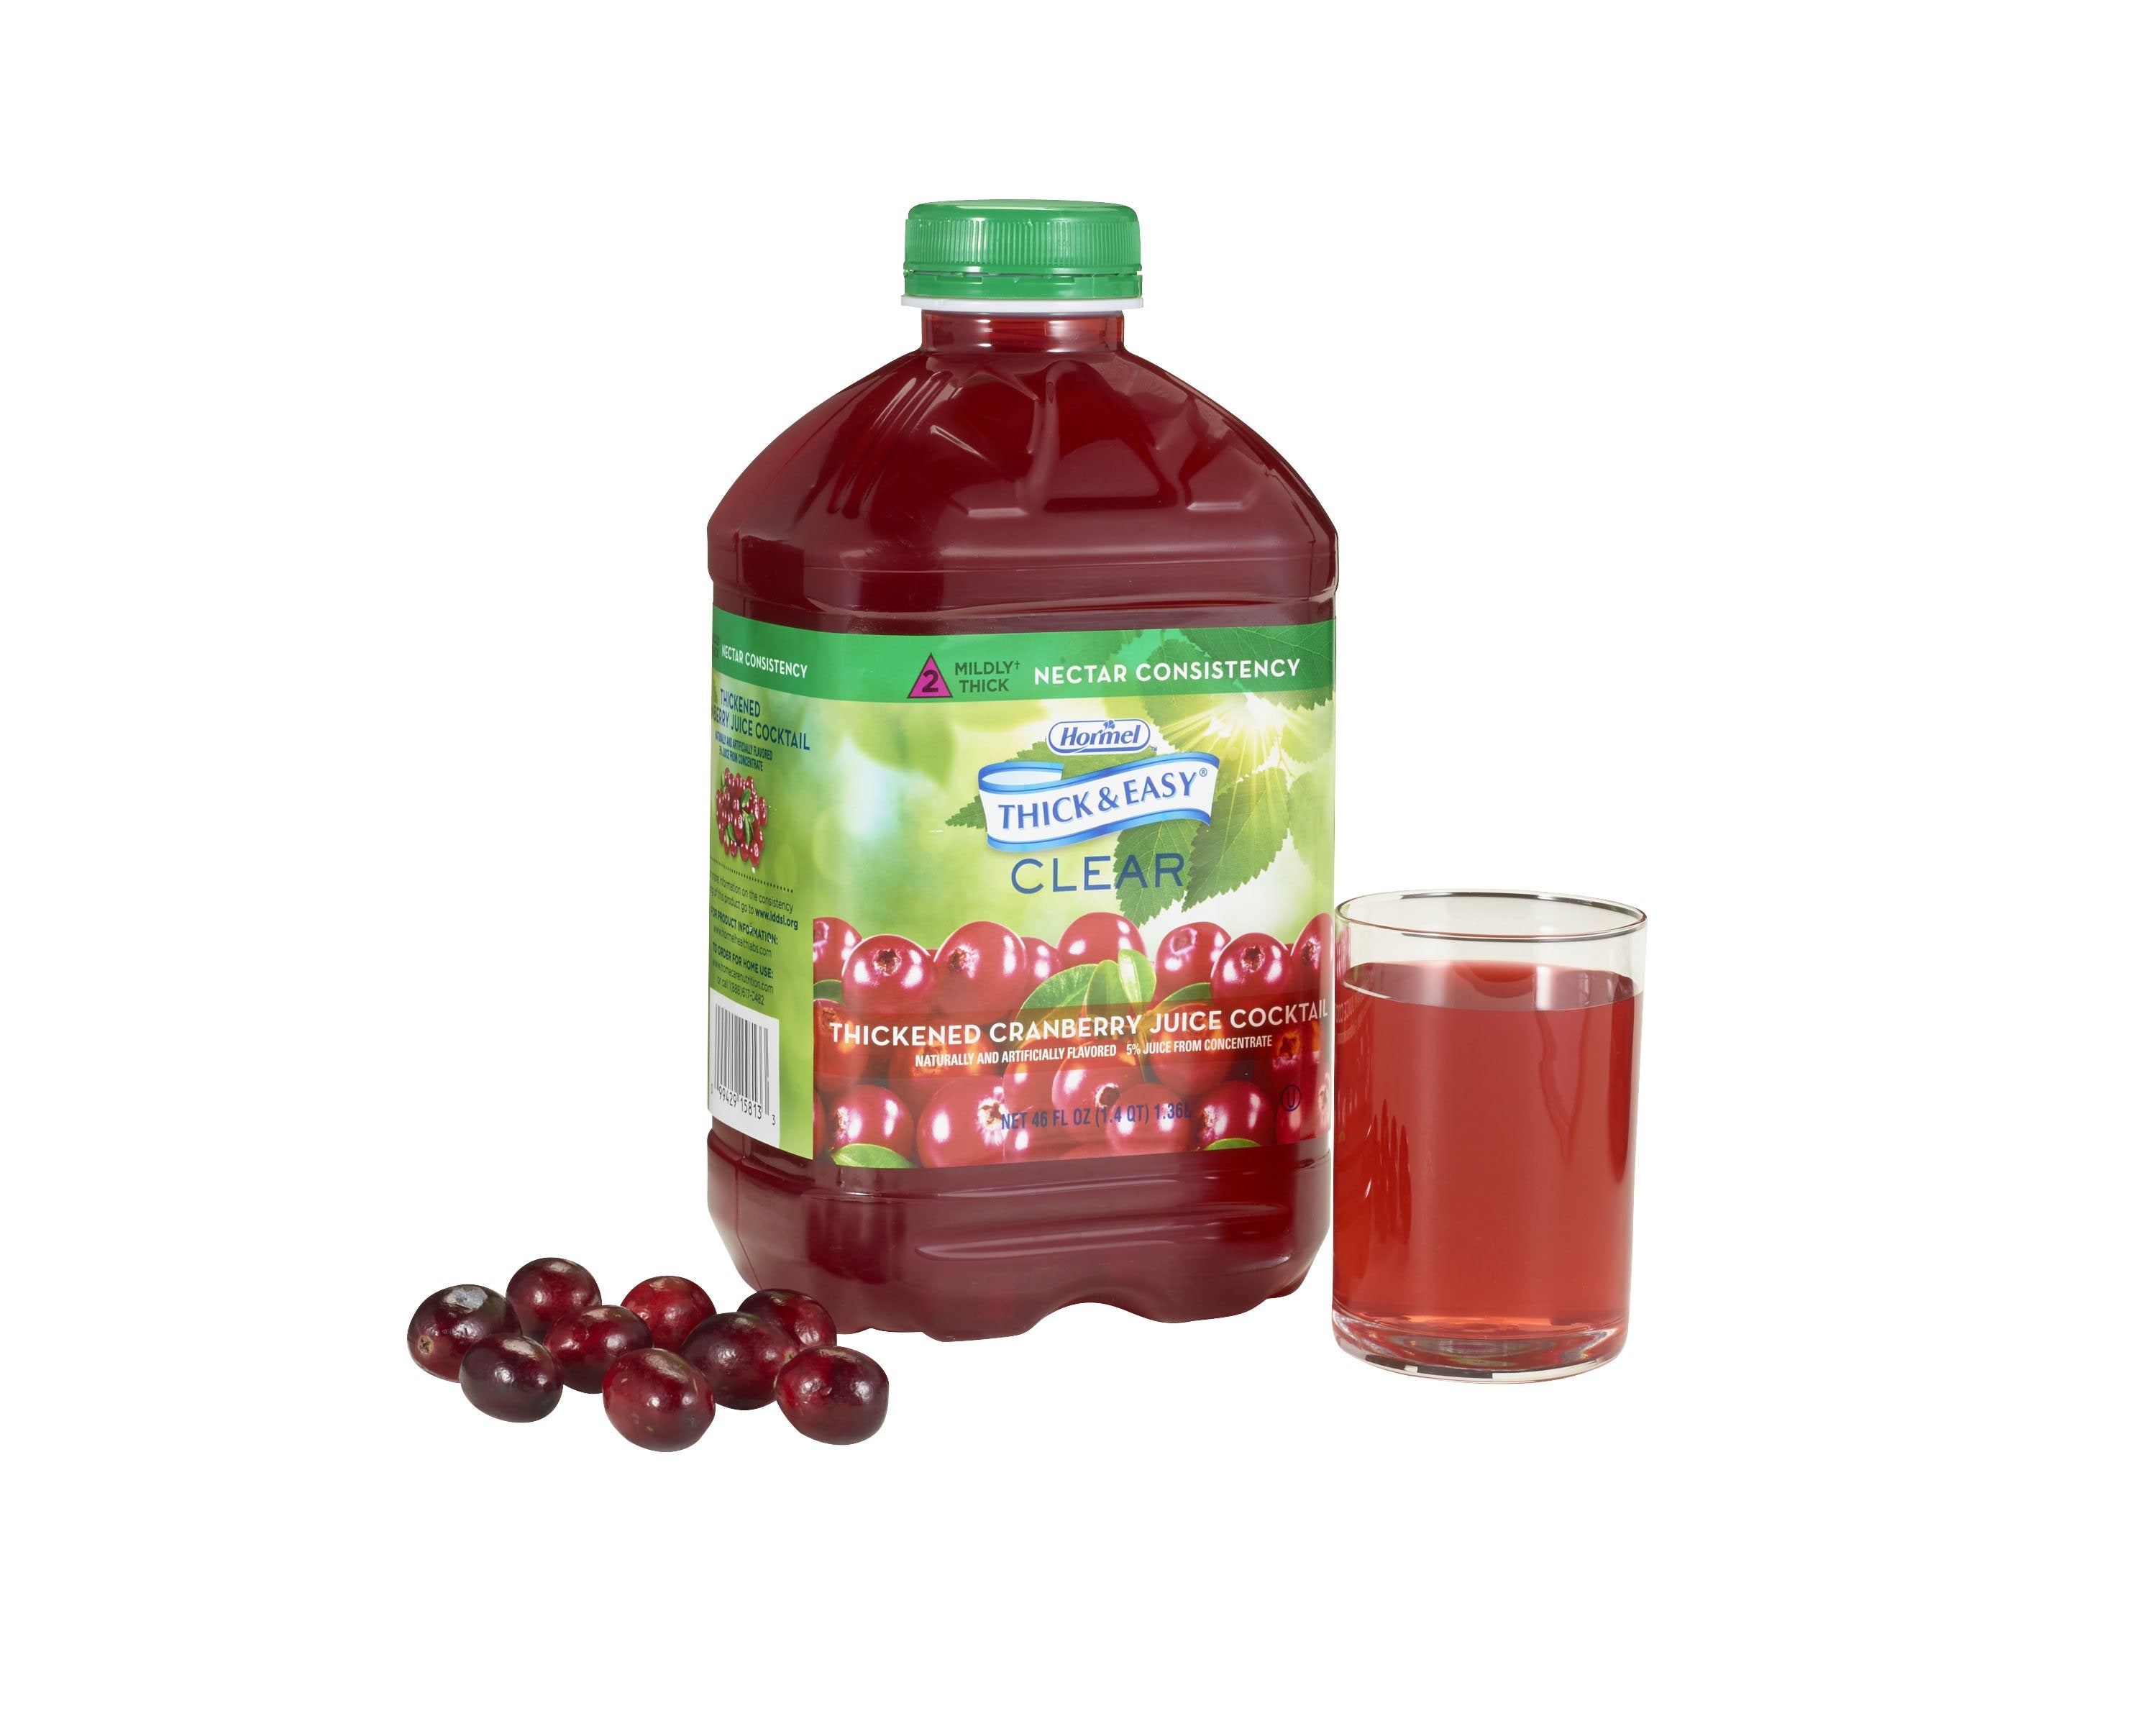 Thickened Beverage Thick & Easy 46 oz. Bottle Cranberry Juice Cocktail Flavor Liquid IDDSI Level 2 Mildly Thick